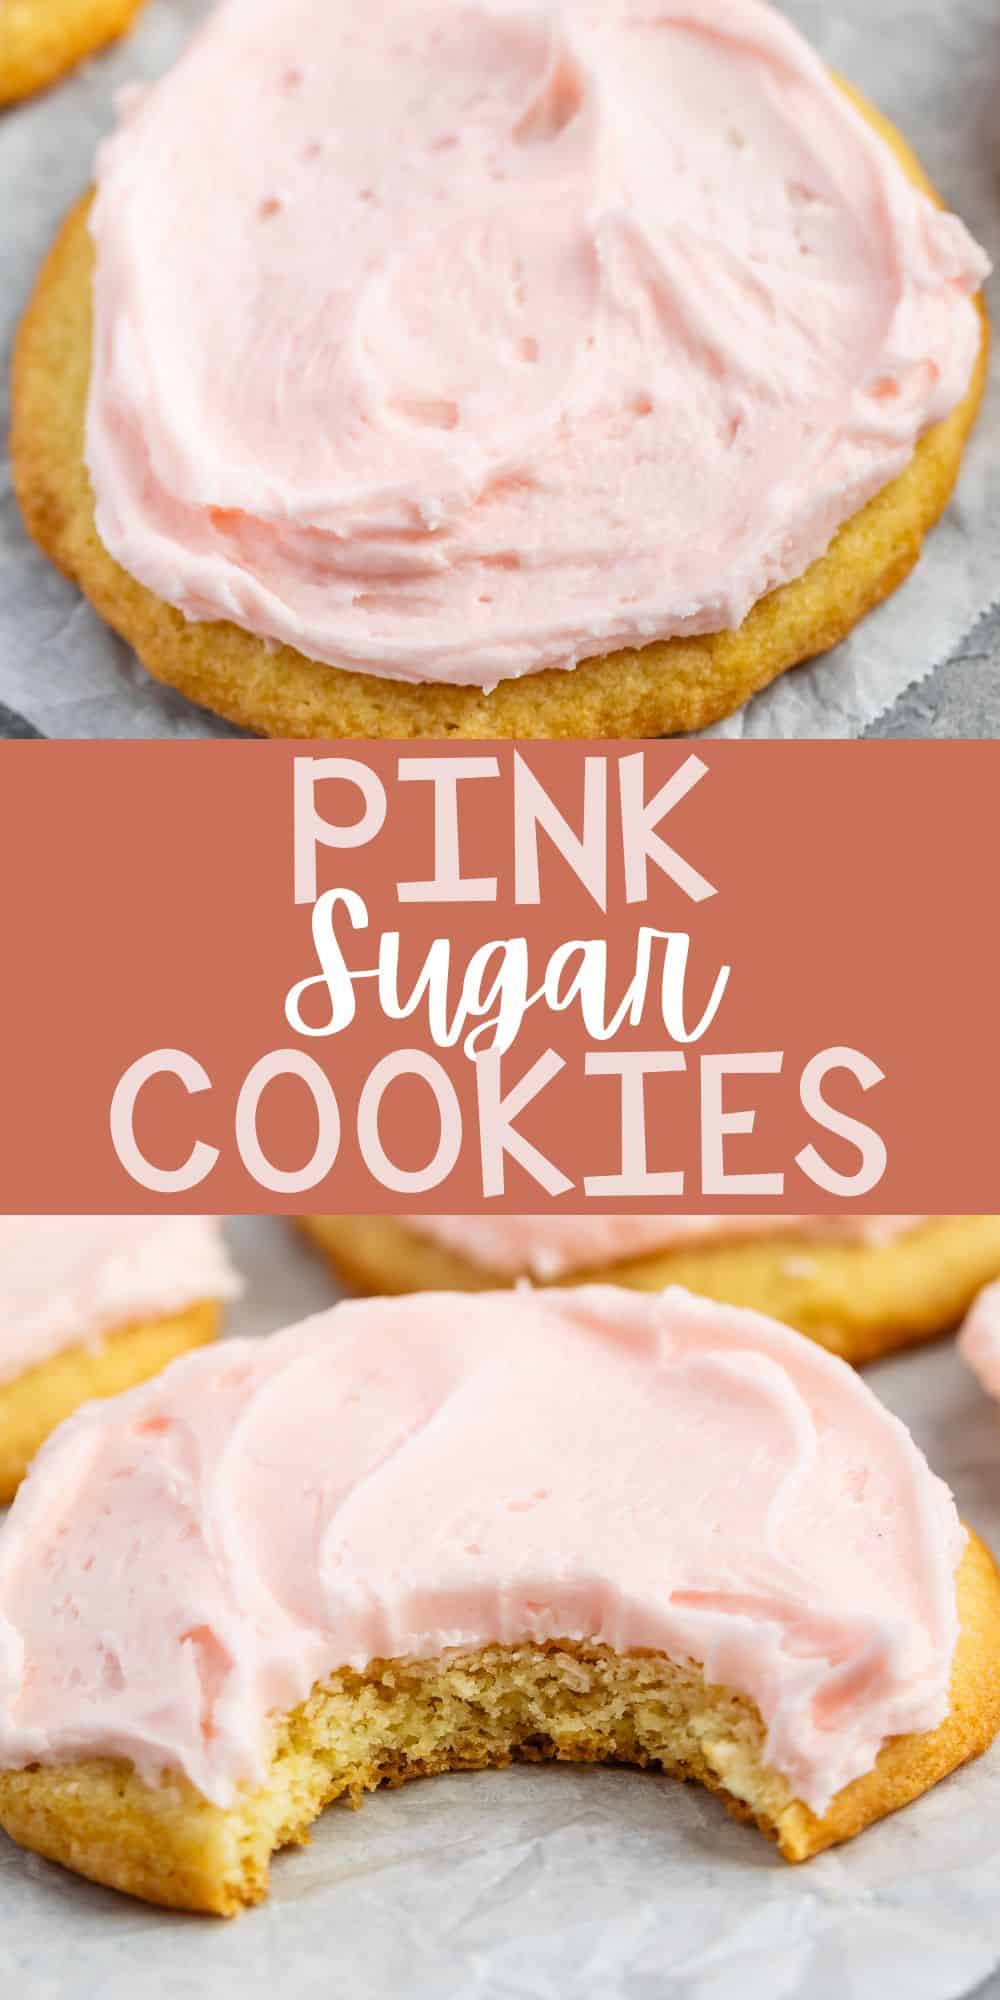 two photos of stacked yellow sugar cookies with pink frosting on top with words on the image.